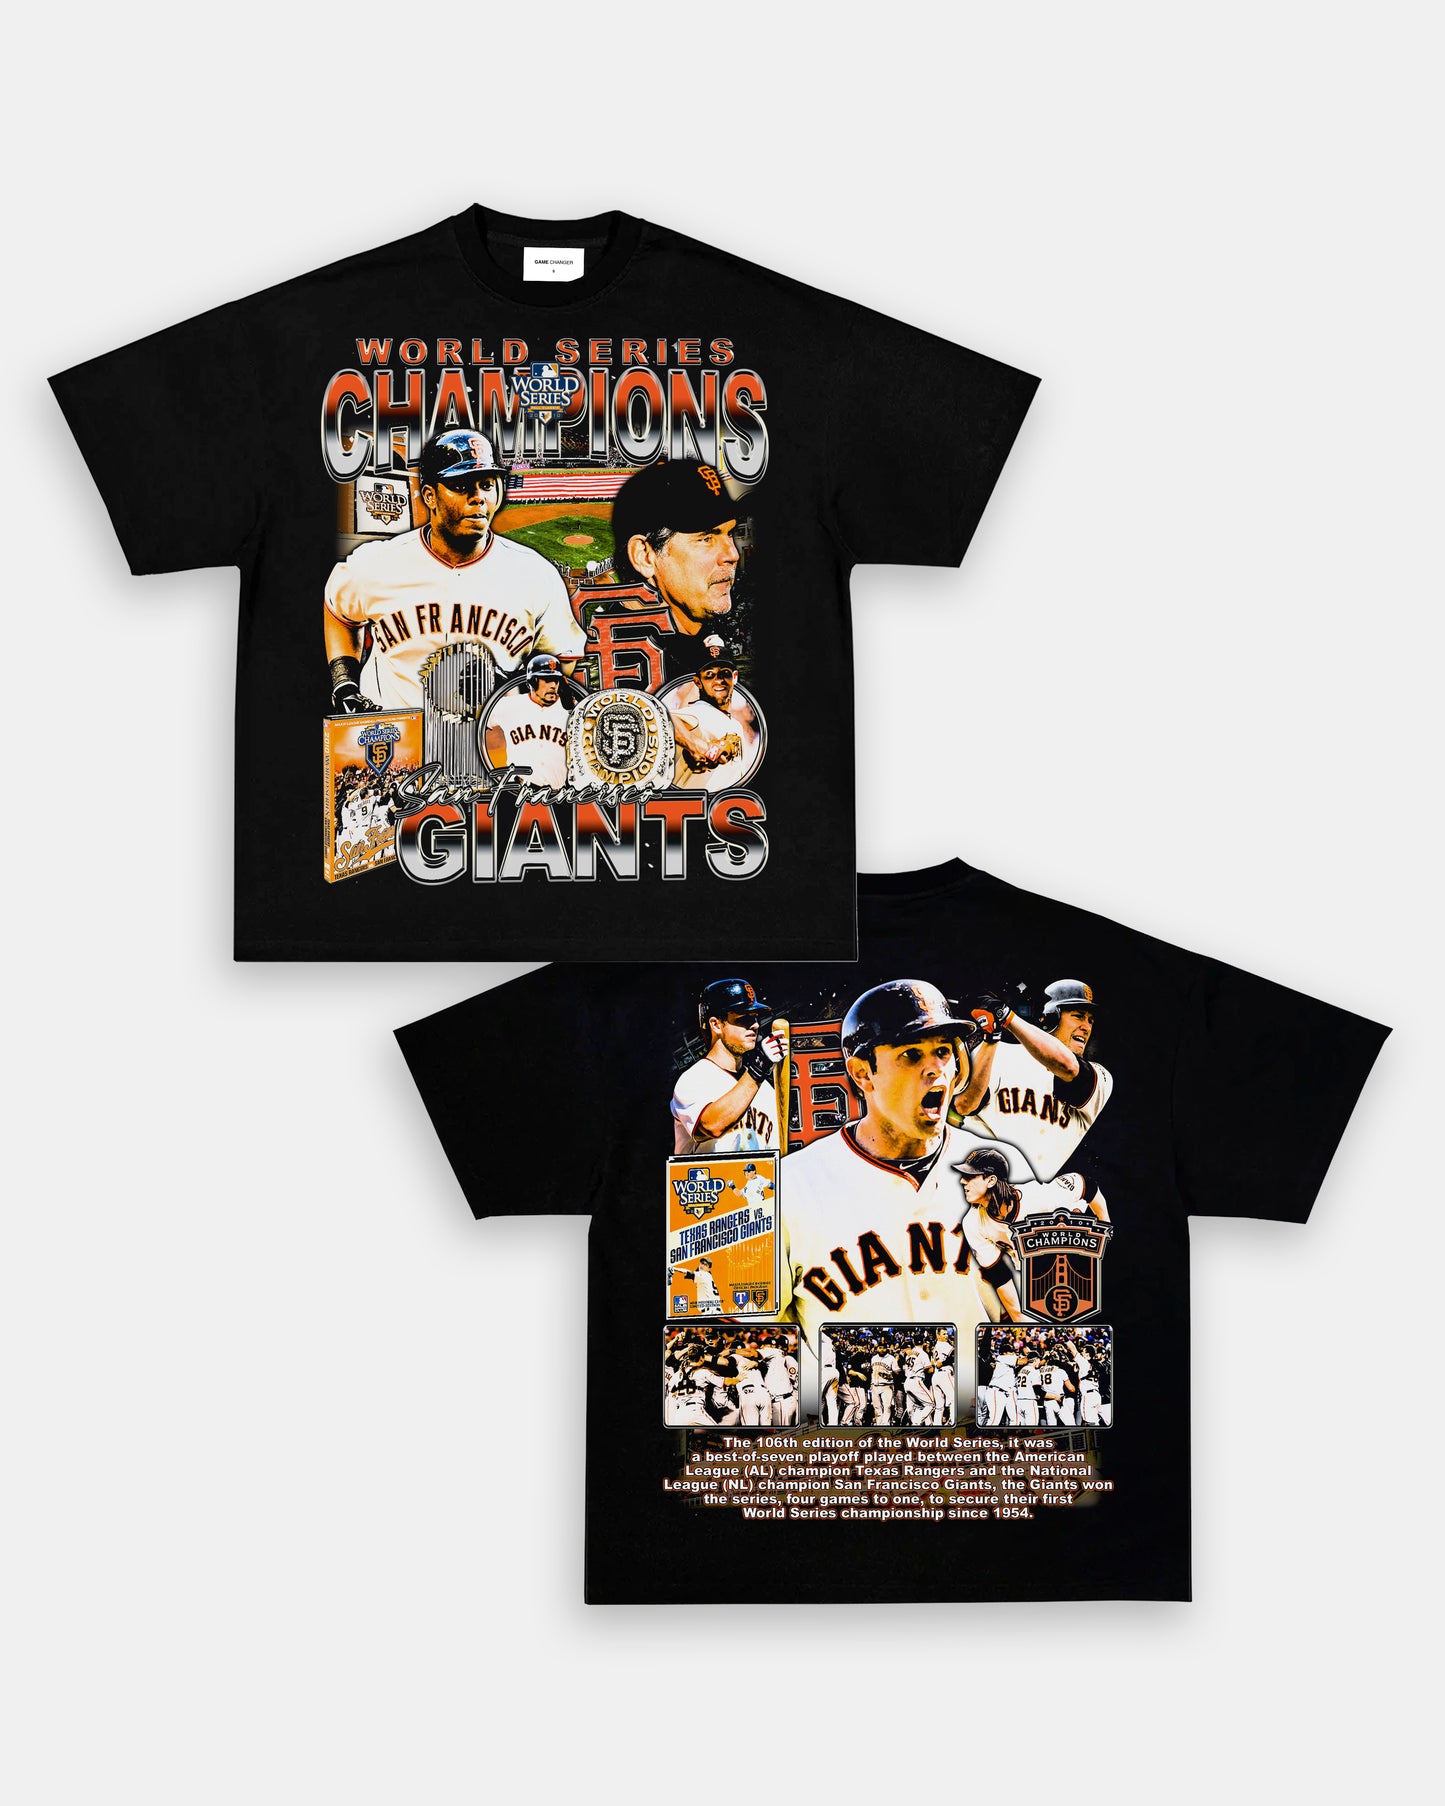 2010 WORLD SERIES CHAMPS - GIANTS TEE - [DS]